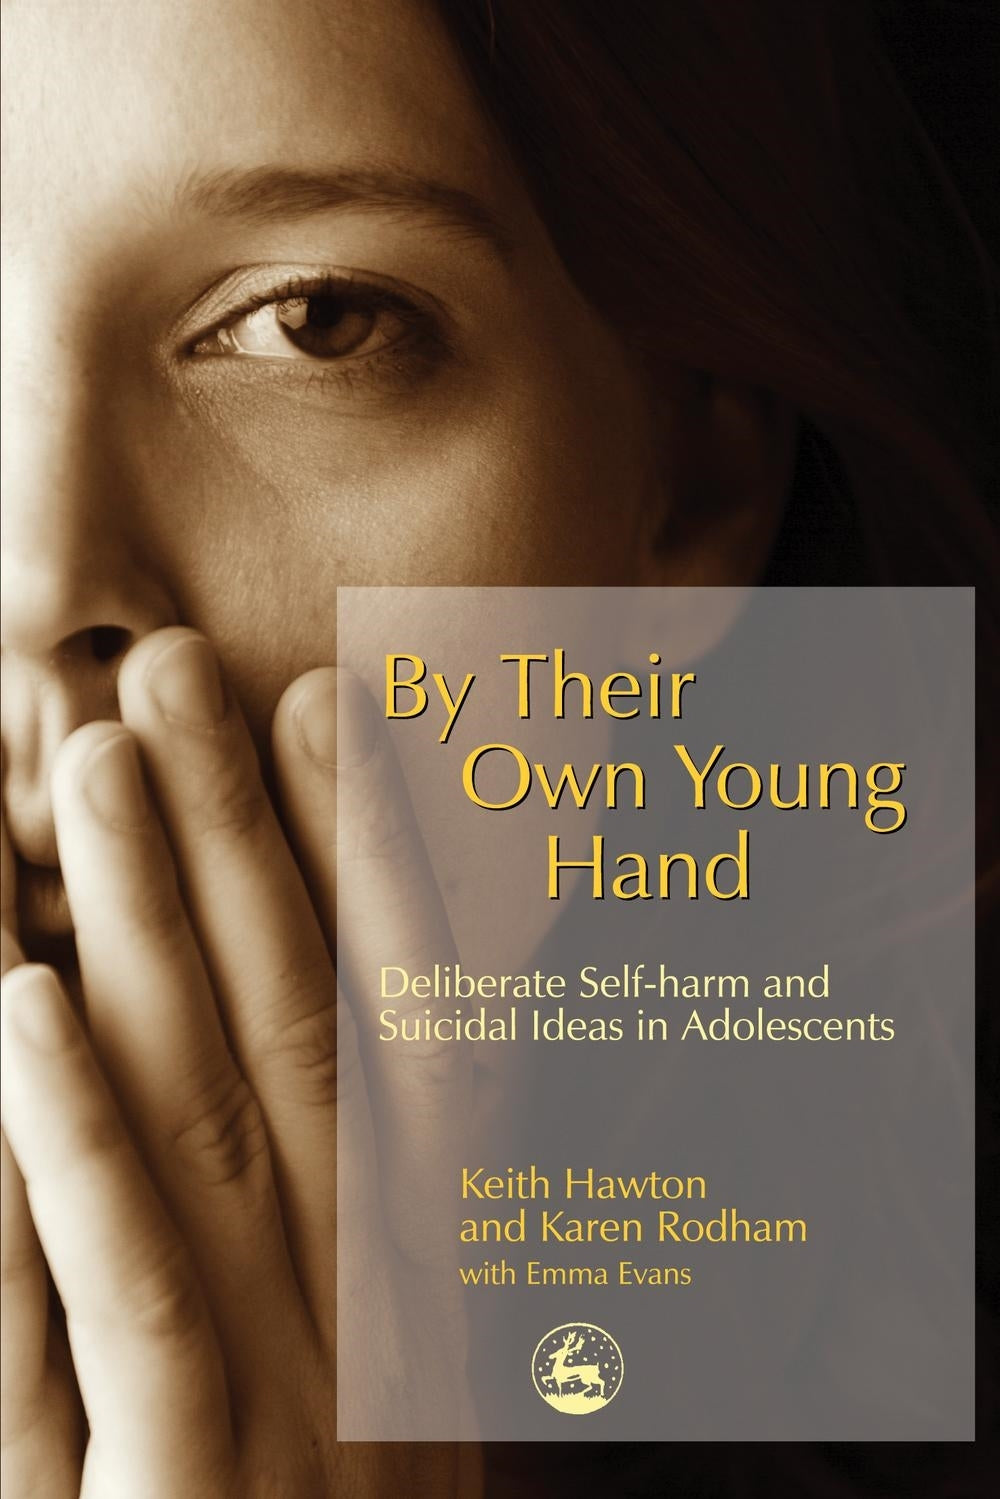 By Their Own Young Hand by Karen Rodham, Keith Hawton